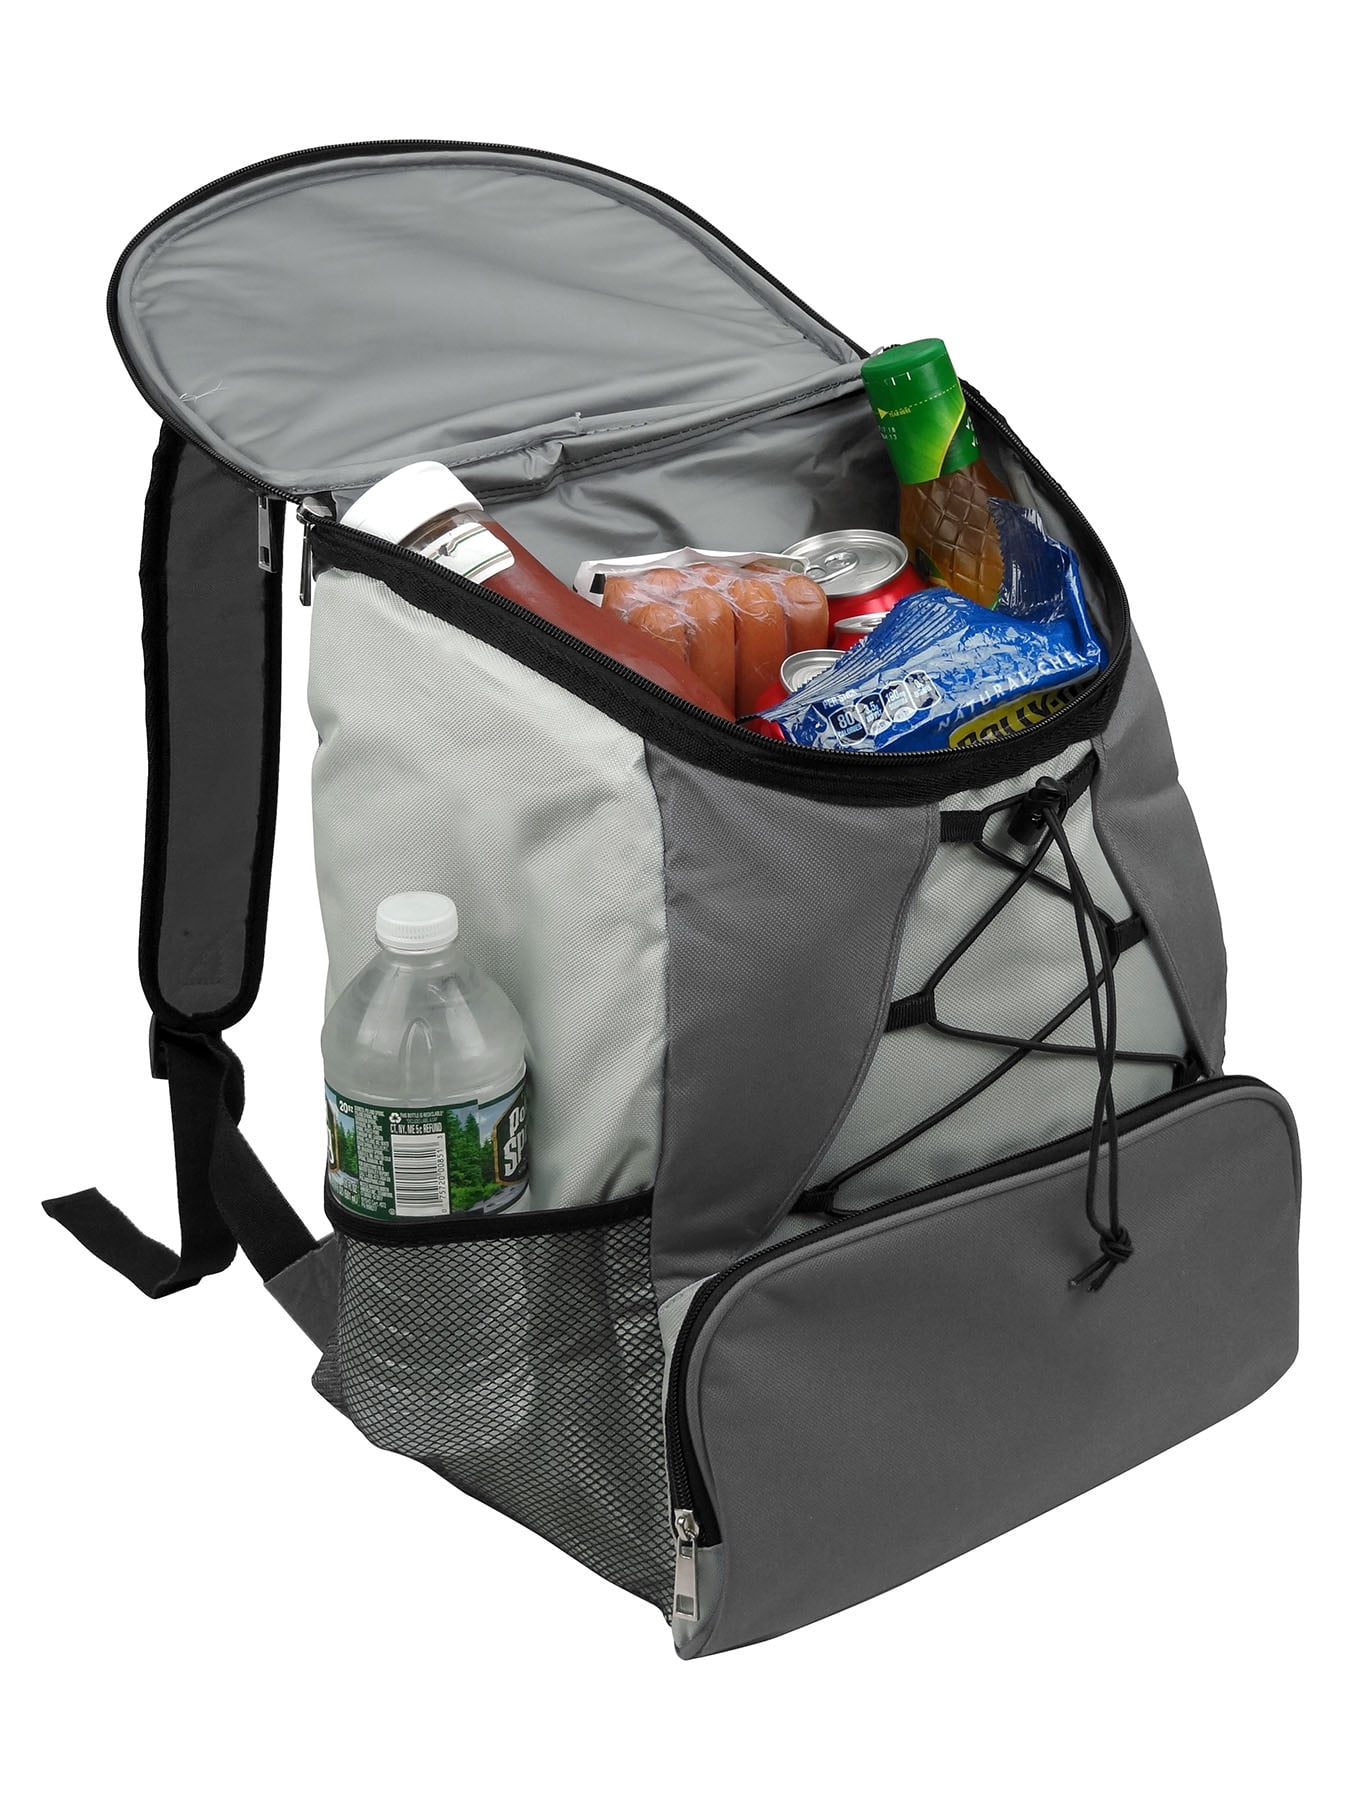 Igloo 24 Can Topgrip Soft Sided Cooler Backpack, Green - Walmart.com